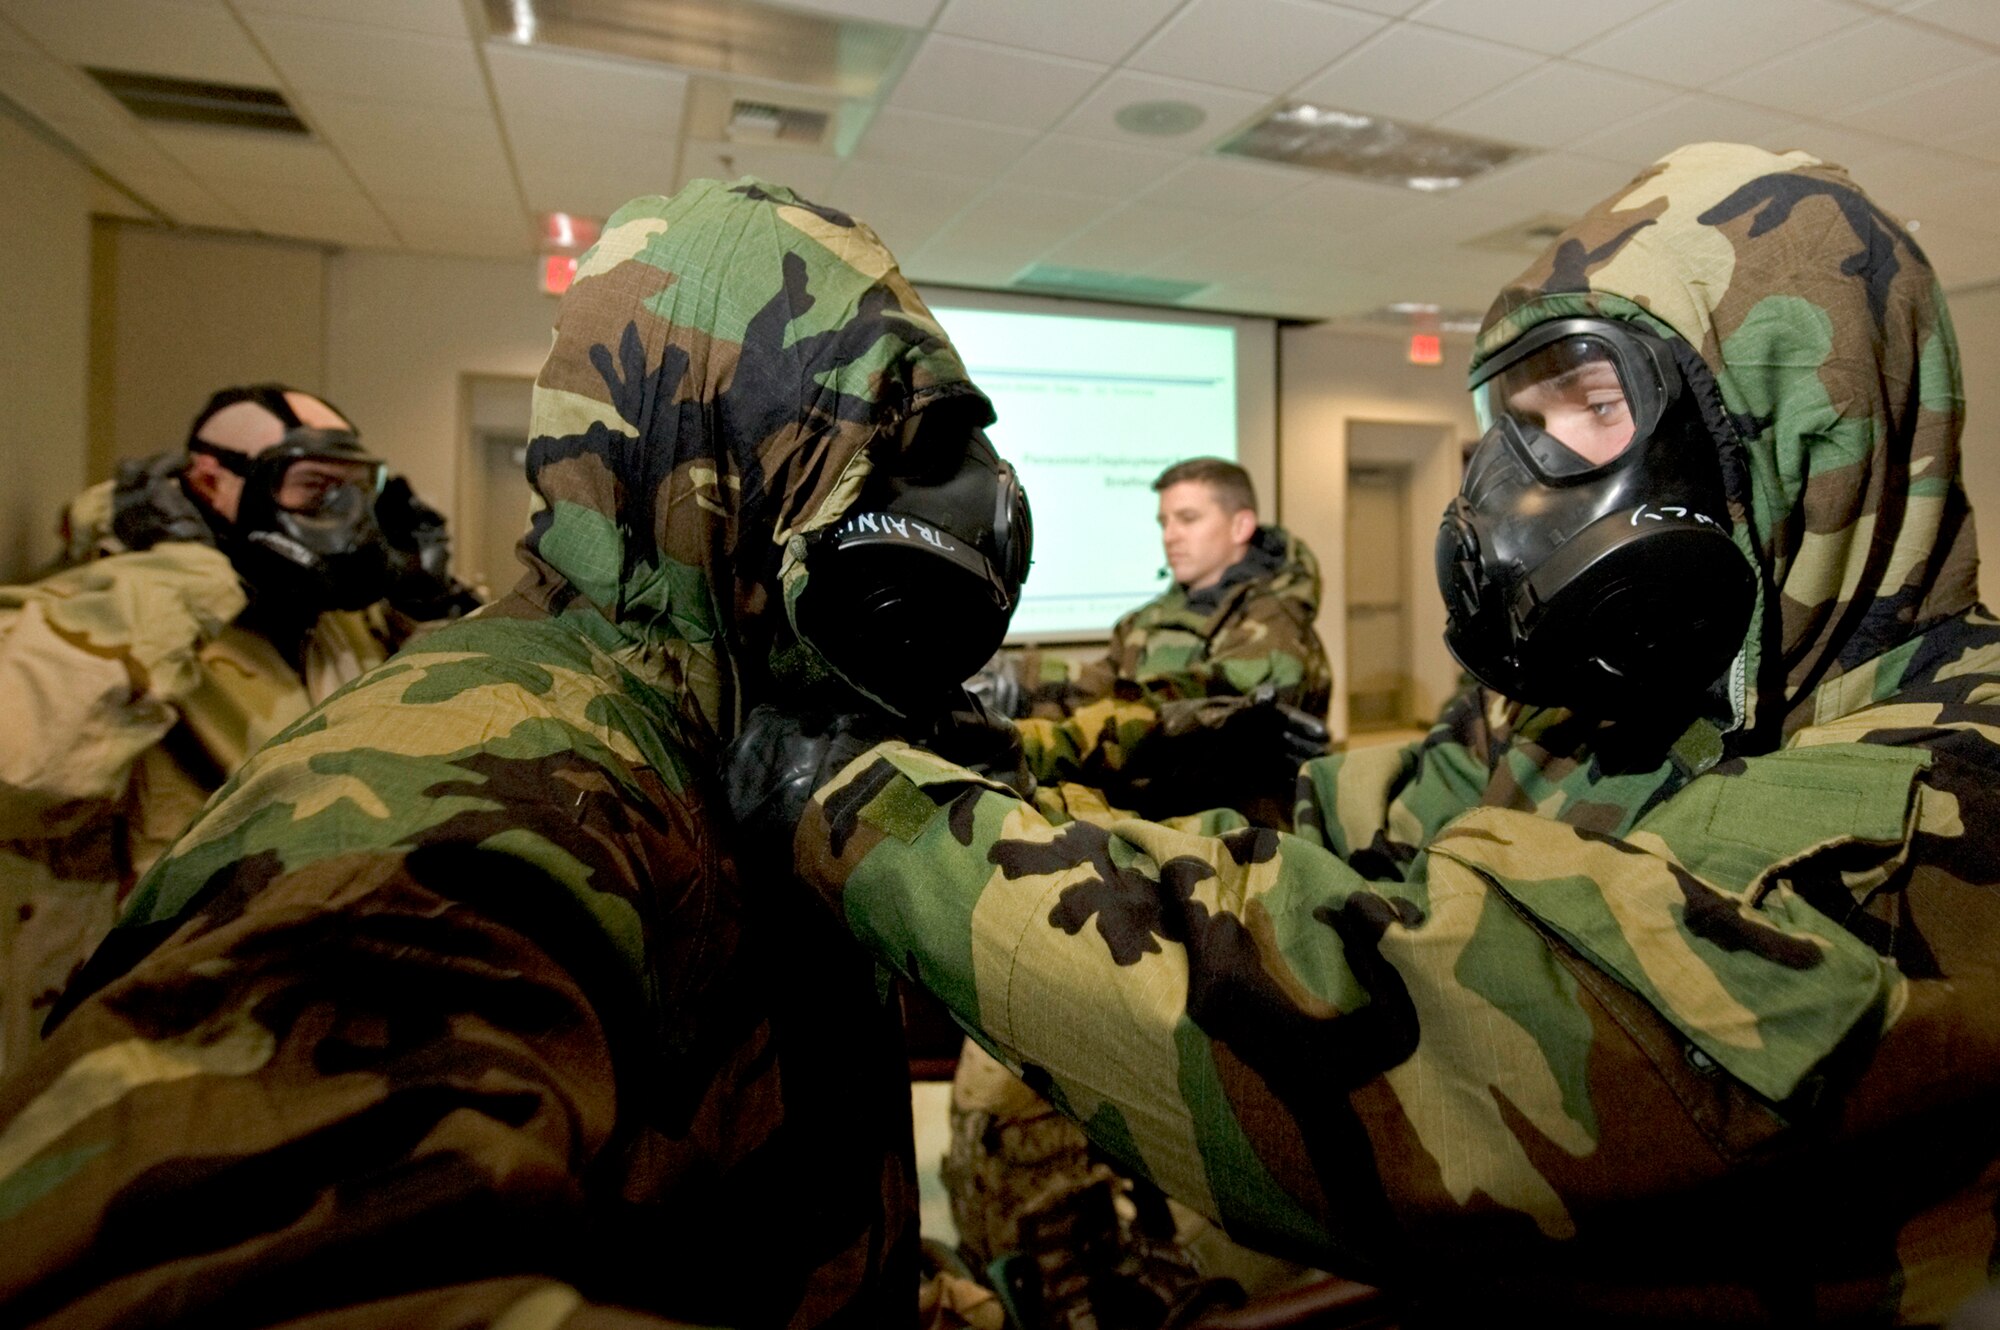 More than 150 Airmen from the 99th Air Base Wing simulated a deployment to test basic knowledge such as self-aid and buddy care, and chemical biological radioactive nuclear and explosive (CBRNE) responses March 19, 2012, at Nellis Air Force Base, Nev. The Operation Readiness Exercise evaluated the strengths and weaknesses of the wing's deployment system. (U.S. Air Force photo by Airman 1st Class Daniel Hughes)